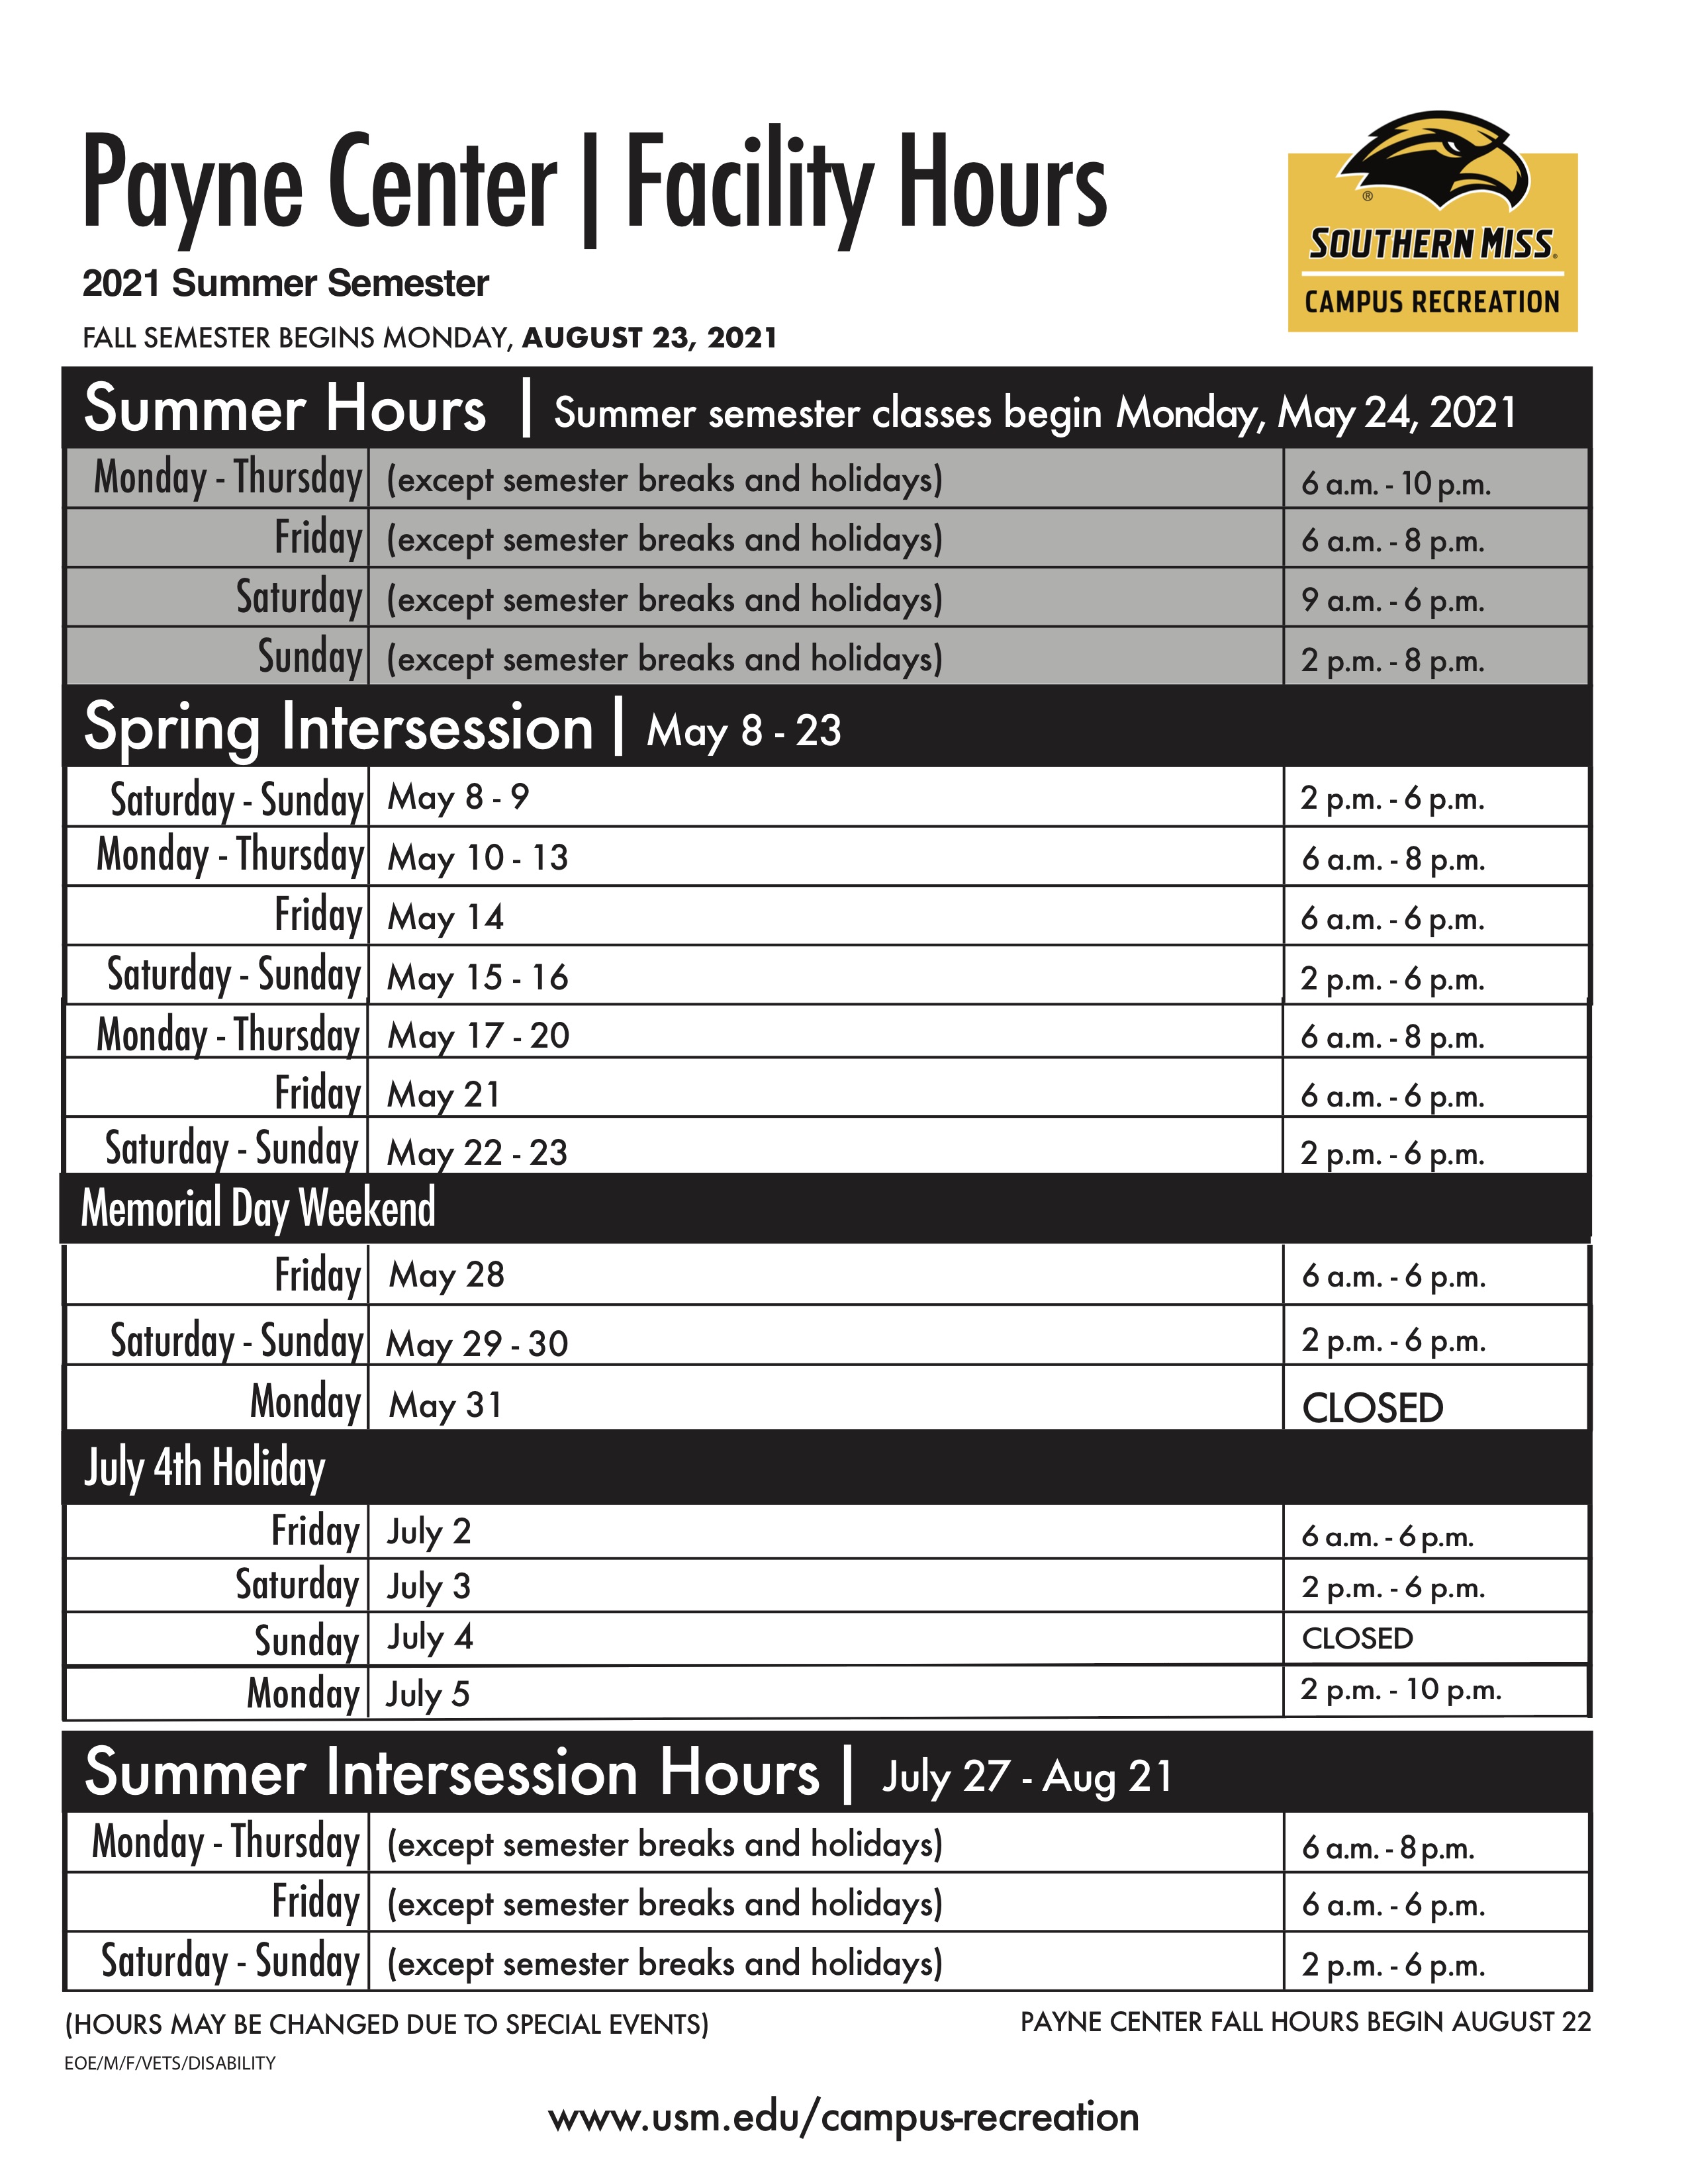 Schedules | Campus Recreation | The University of Southern Mississippi